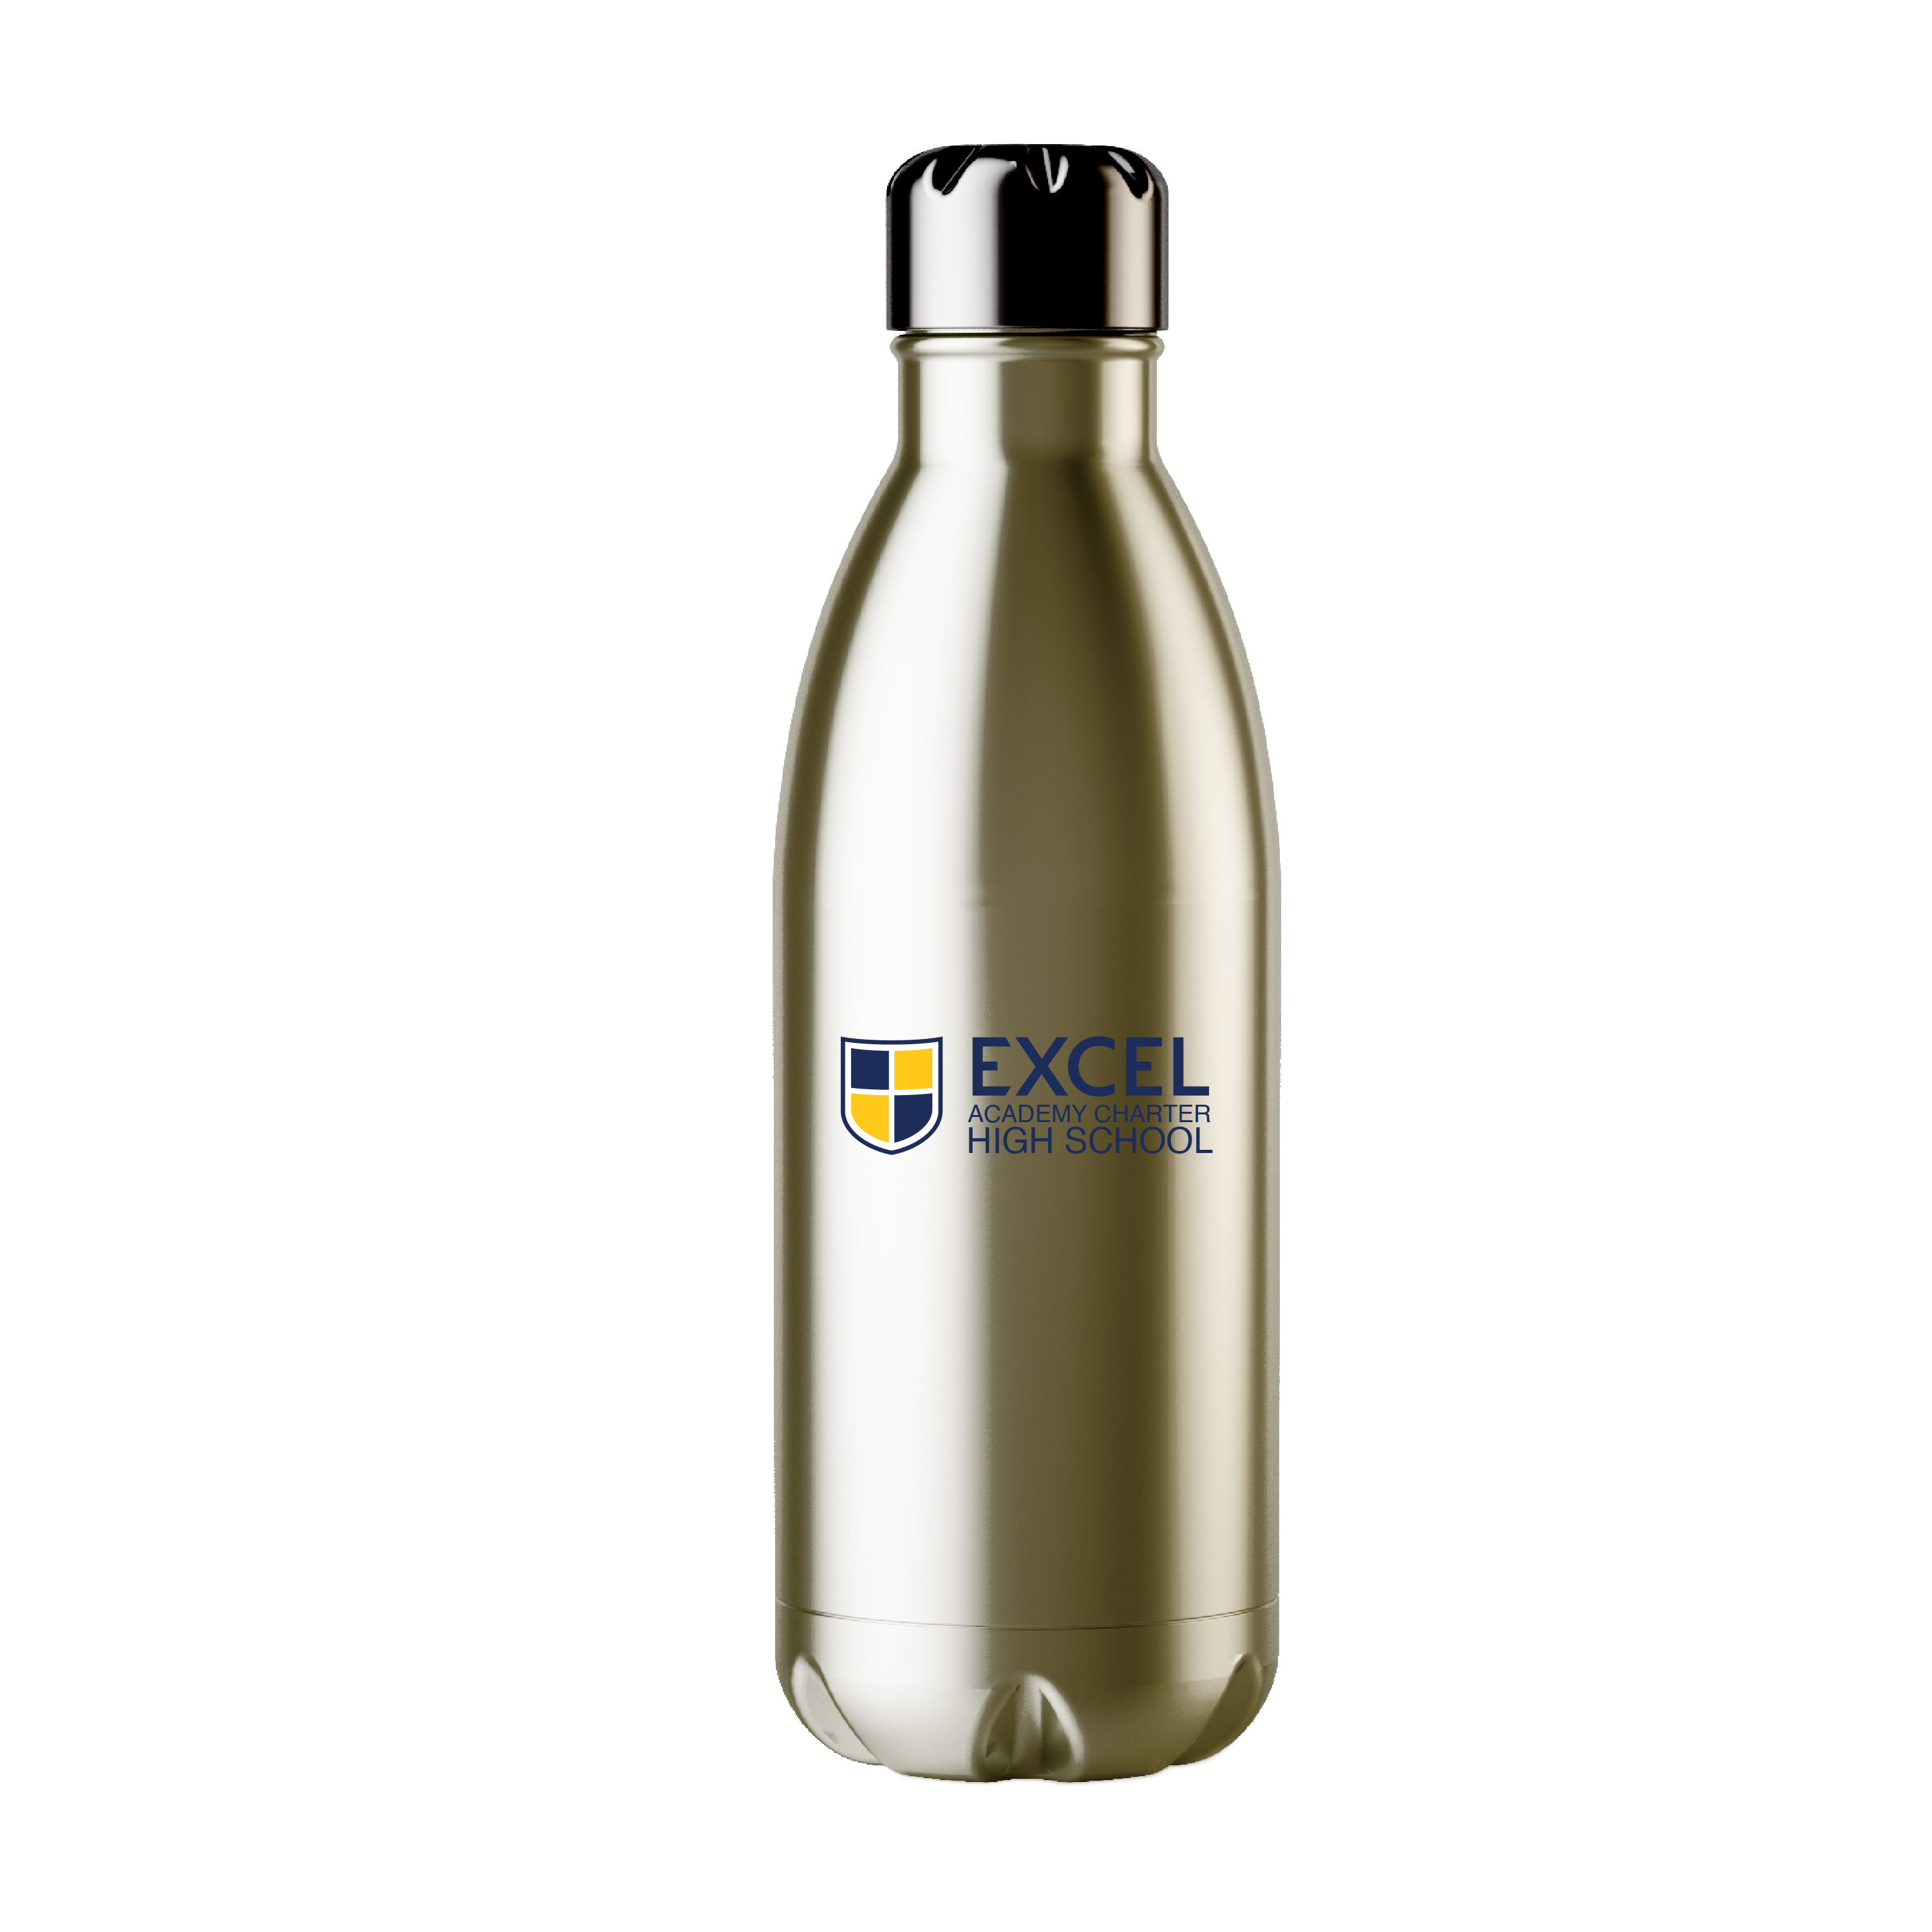 Excel Academy Charter High School TAPERED STAINLESS STEEL WATER BOTTLE W/CAP